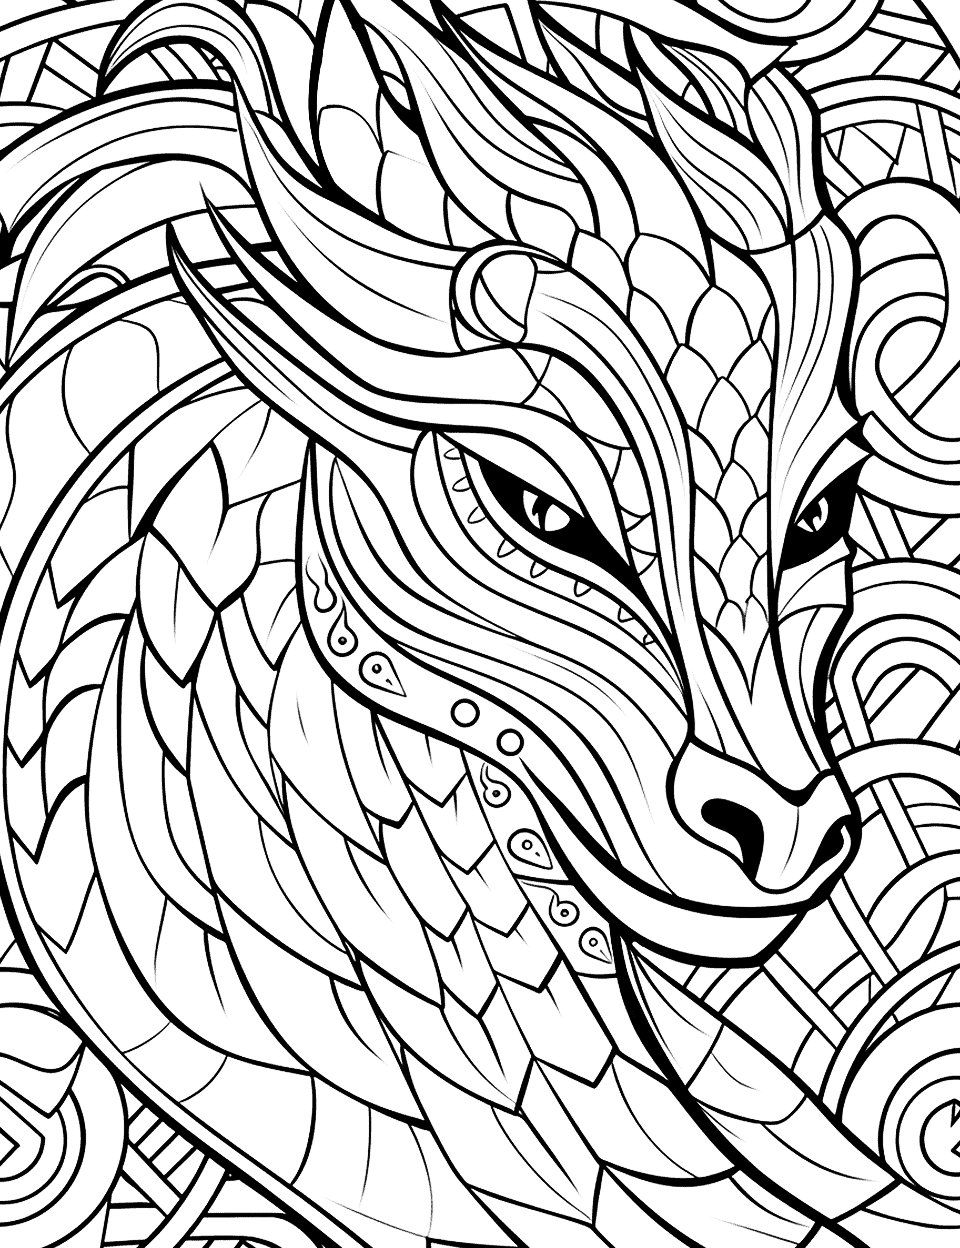 Abstract Dragon Art Adult Coloring Page - An abstract page filled with dragon-inspired doodles depicted in geometric patterns and lines.